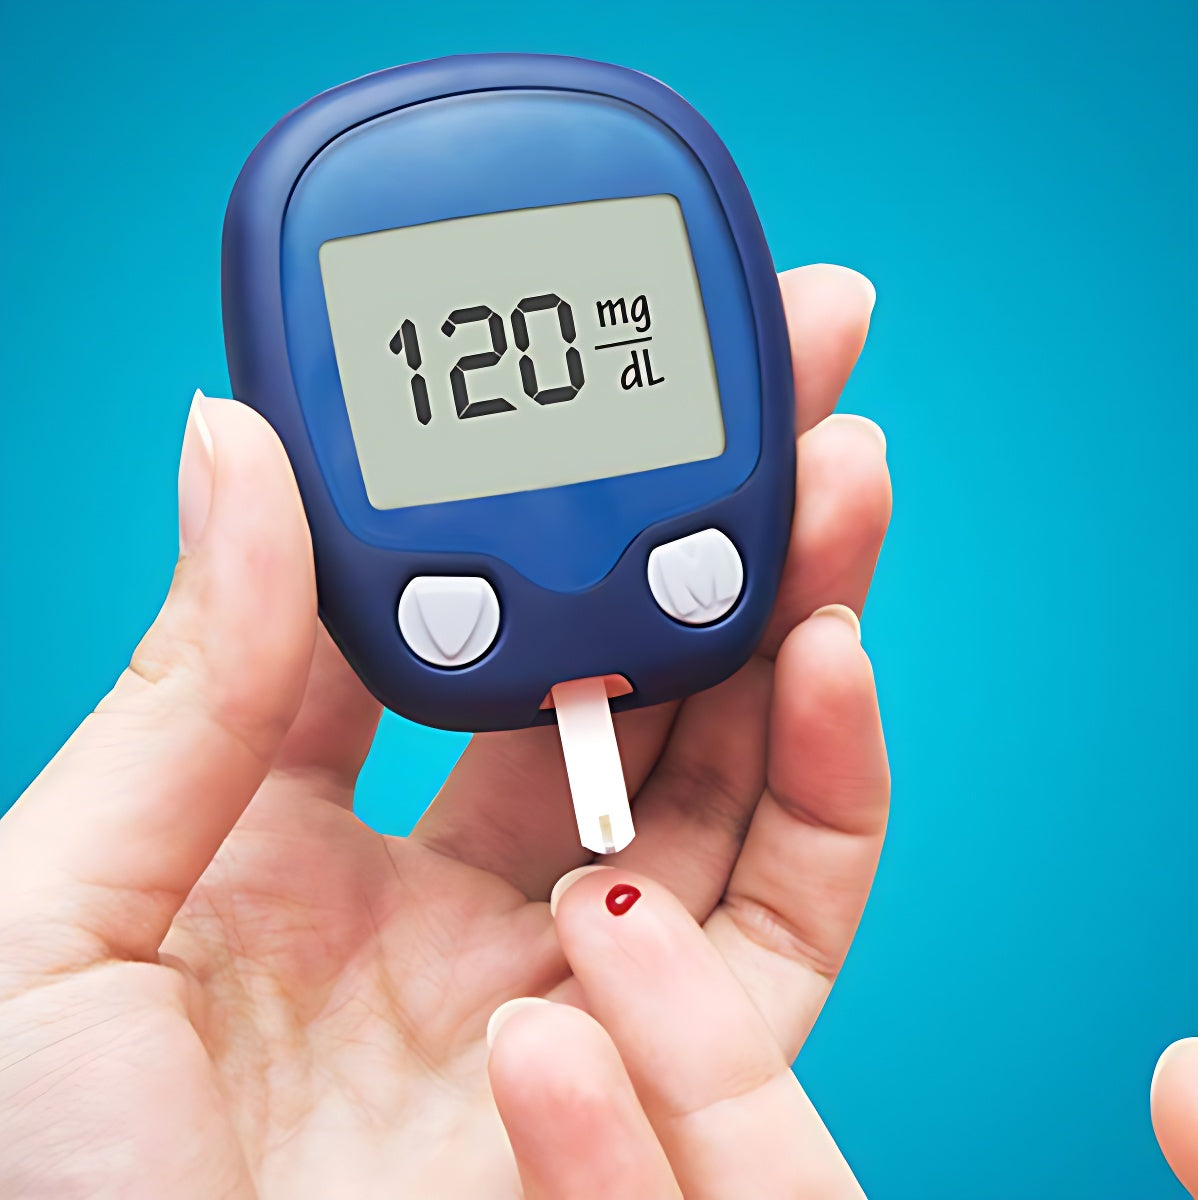 Diabetes care - Diabetes is a chronic health condition characterized by high levels of sugar (glucose) in the blood.